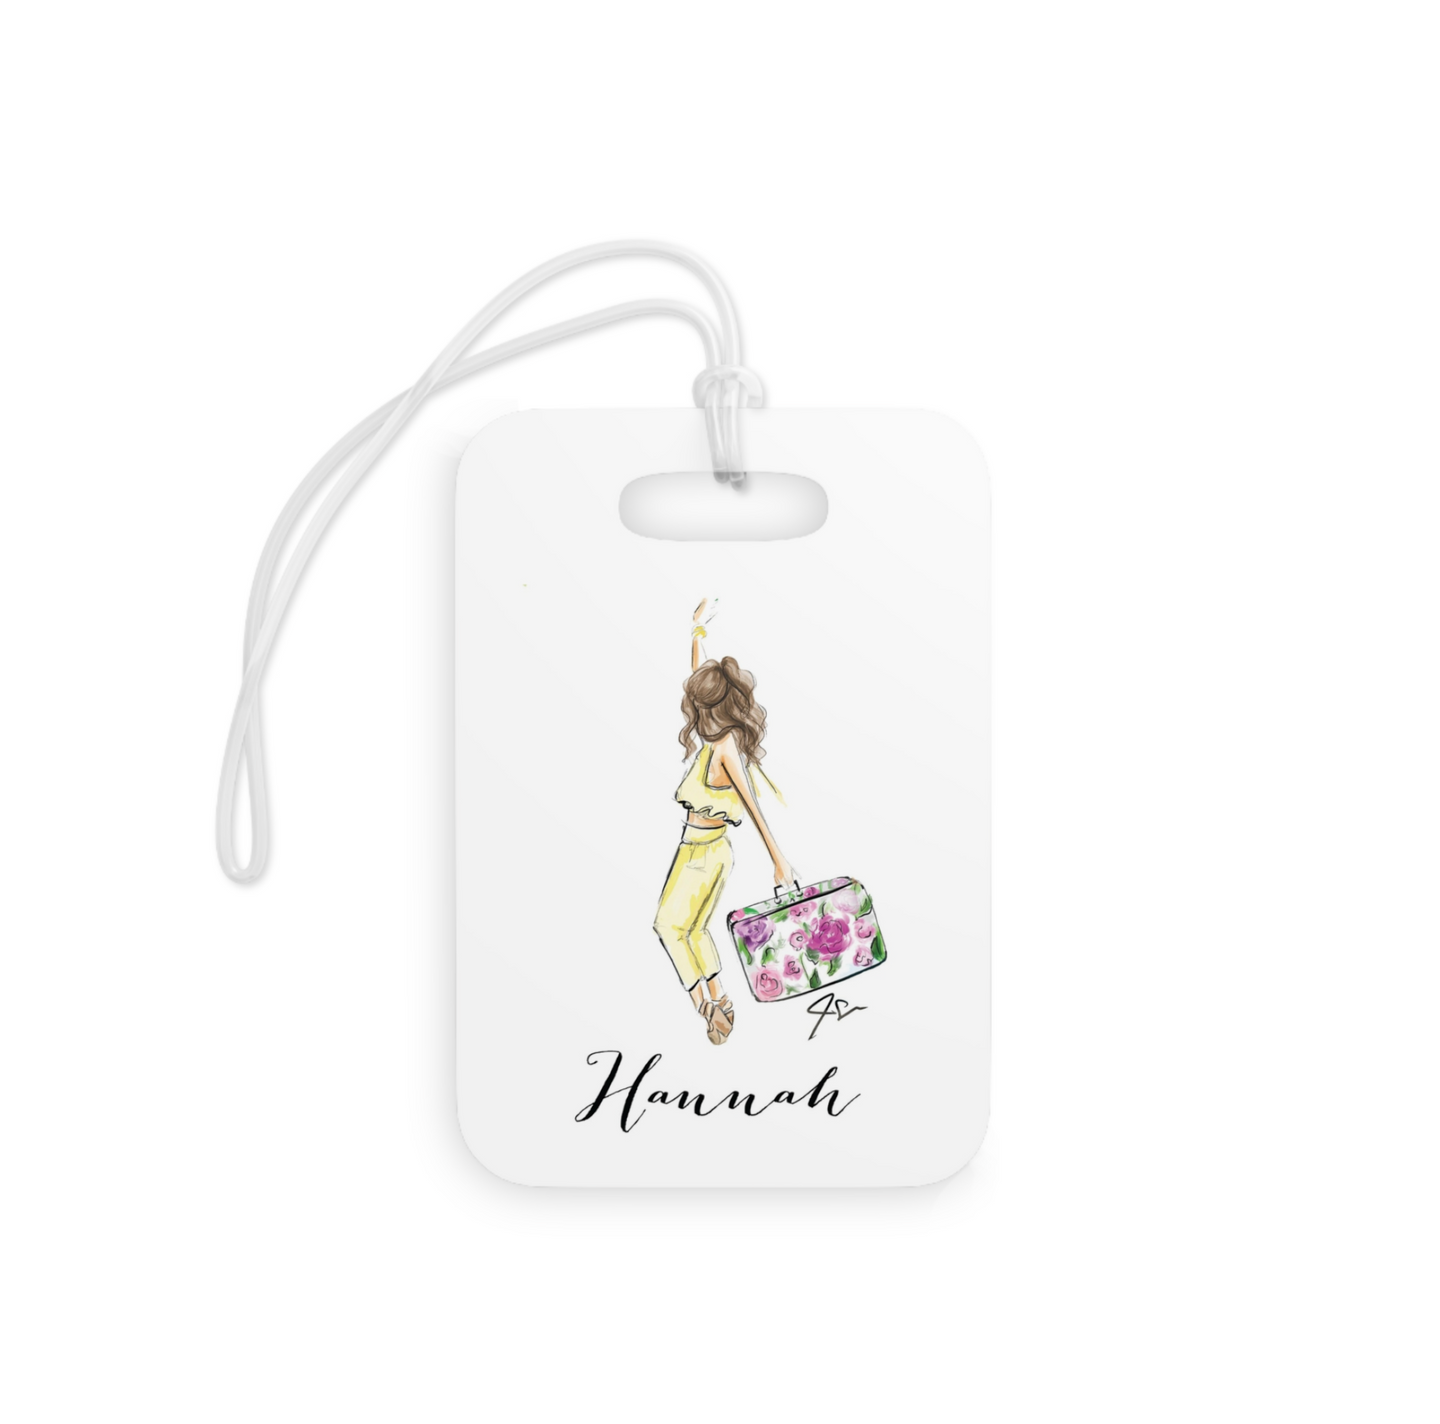 Customized Floral Suitcase Luggage Tag